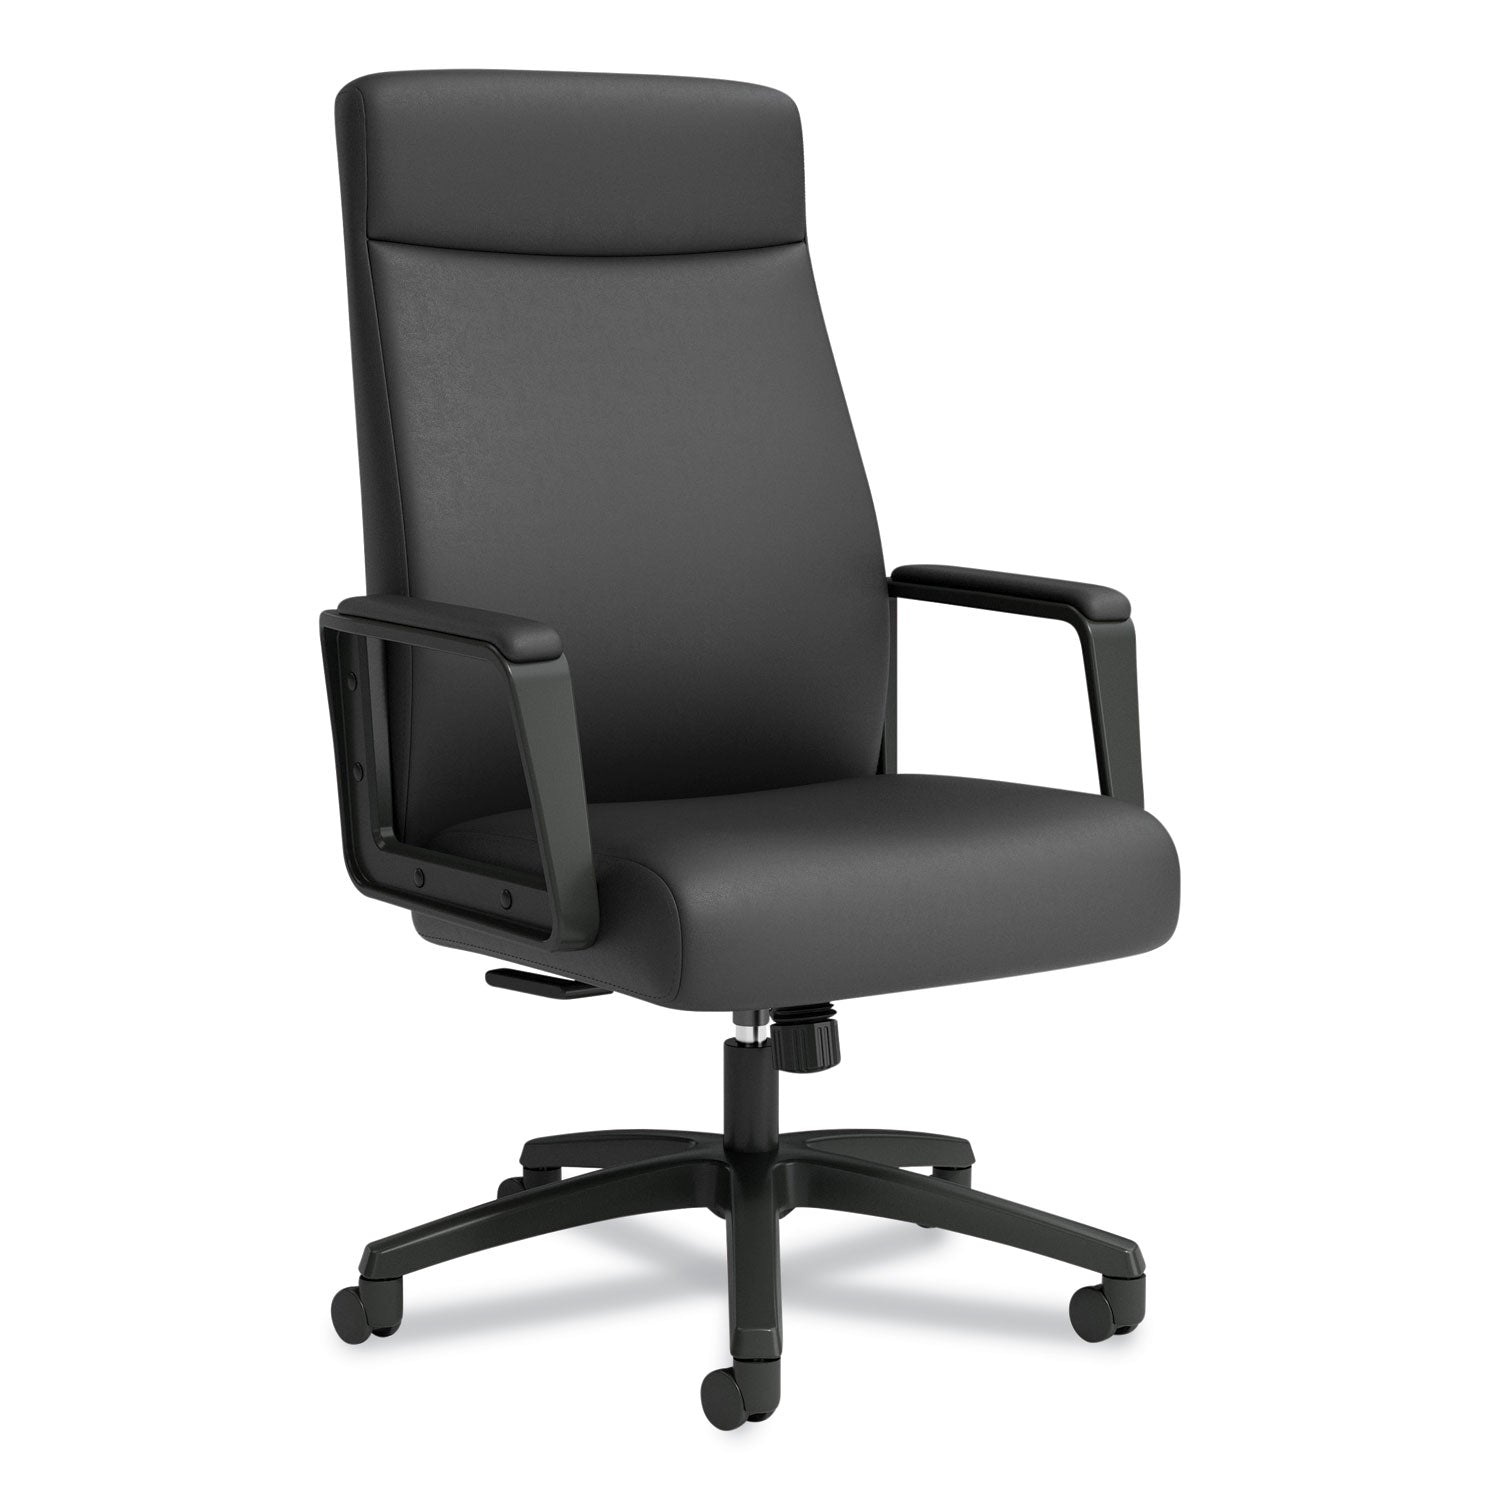 prestige-bonded-leather-manager-chair-supports-up-to-275-lb-black-seat-back-black-base_uos59408 - 1